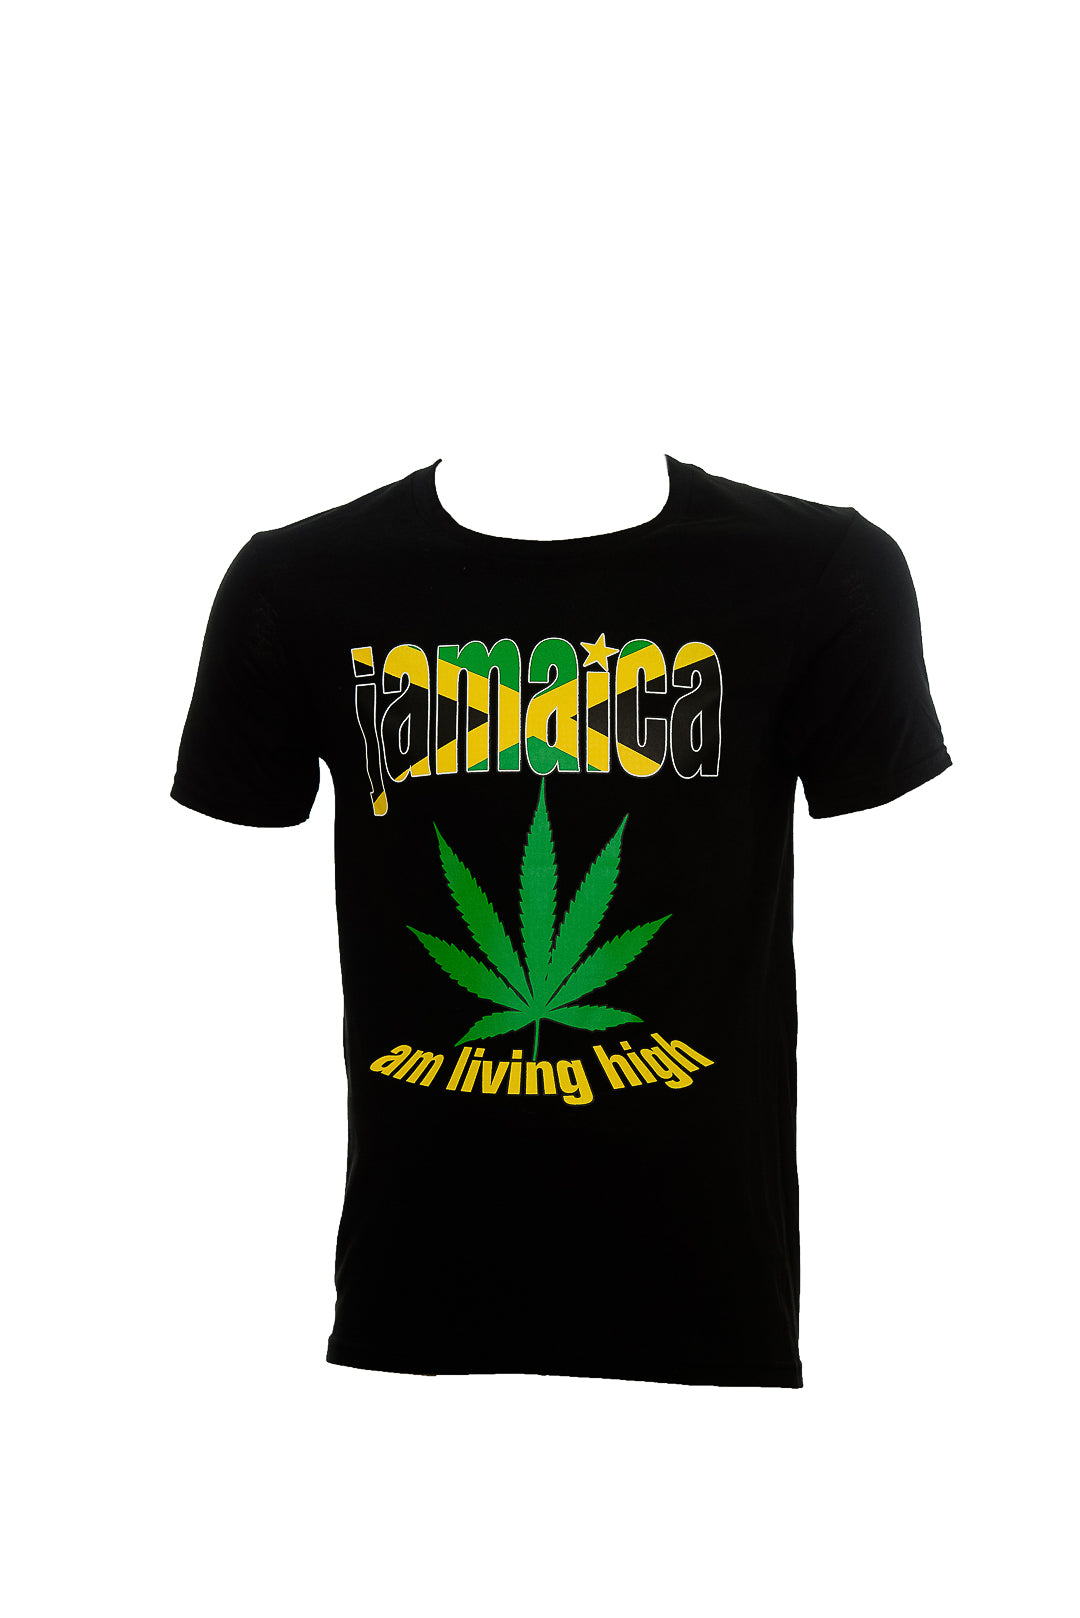 Exclusive Jamaican T shirts